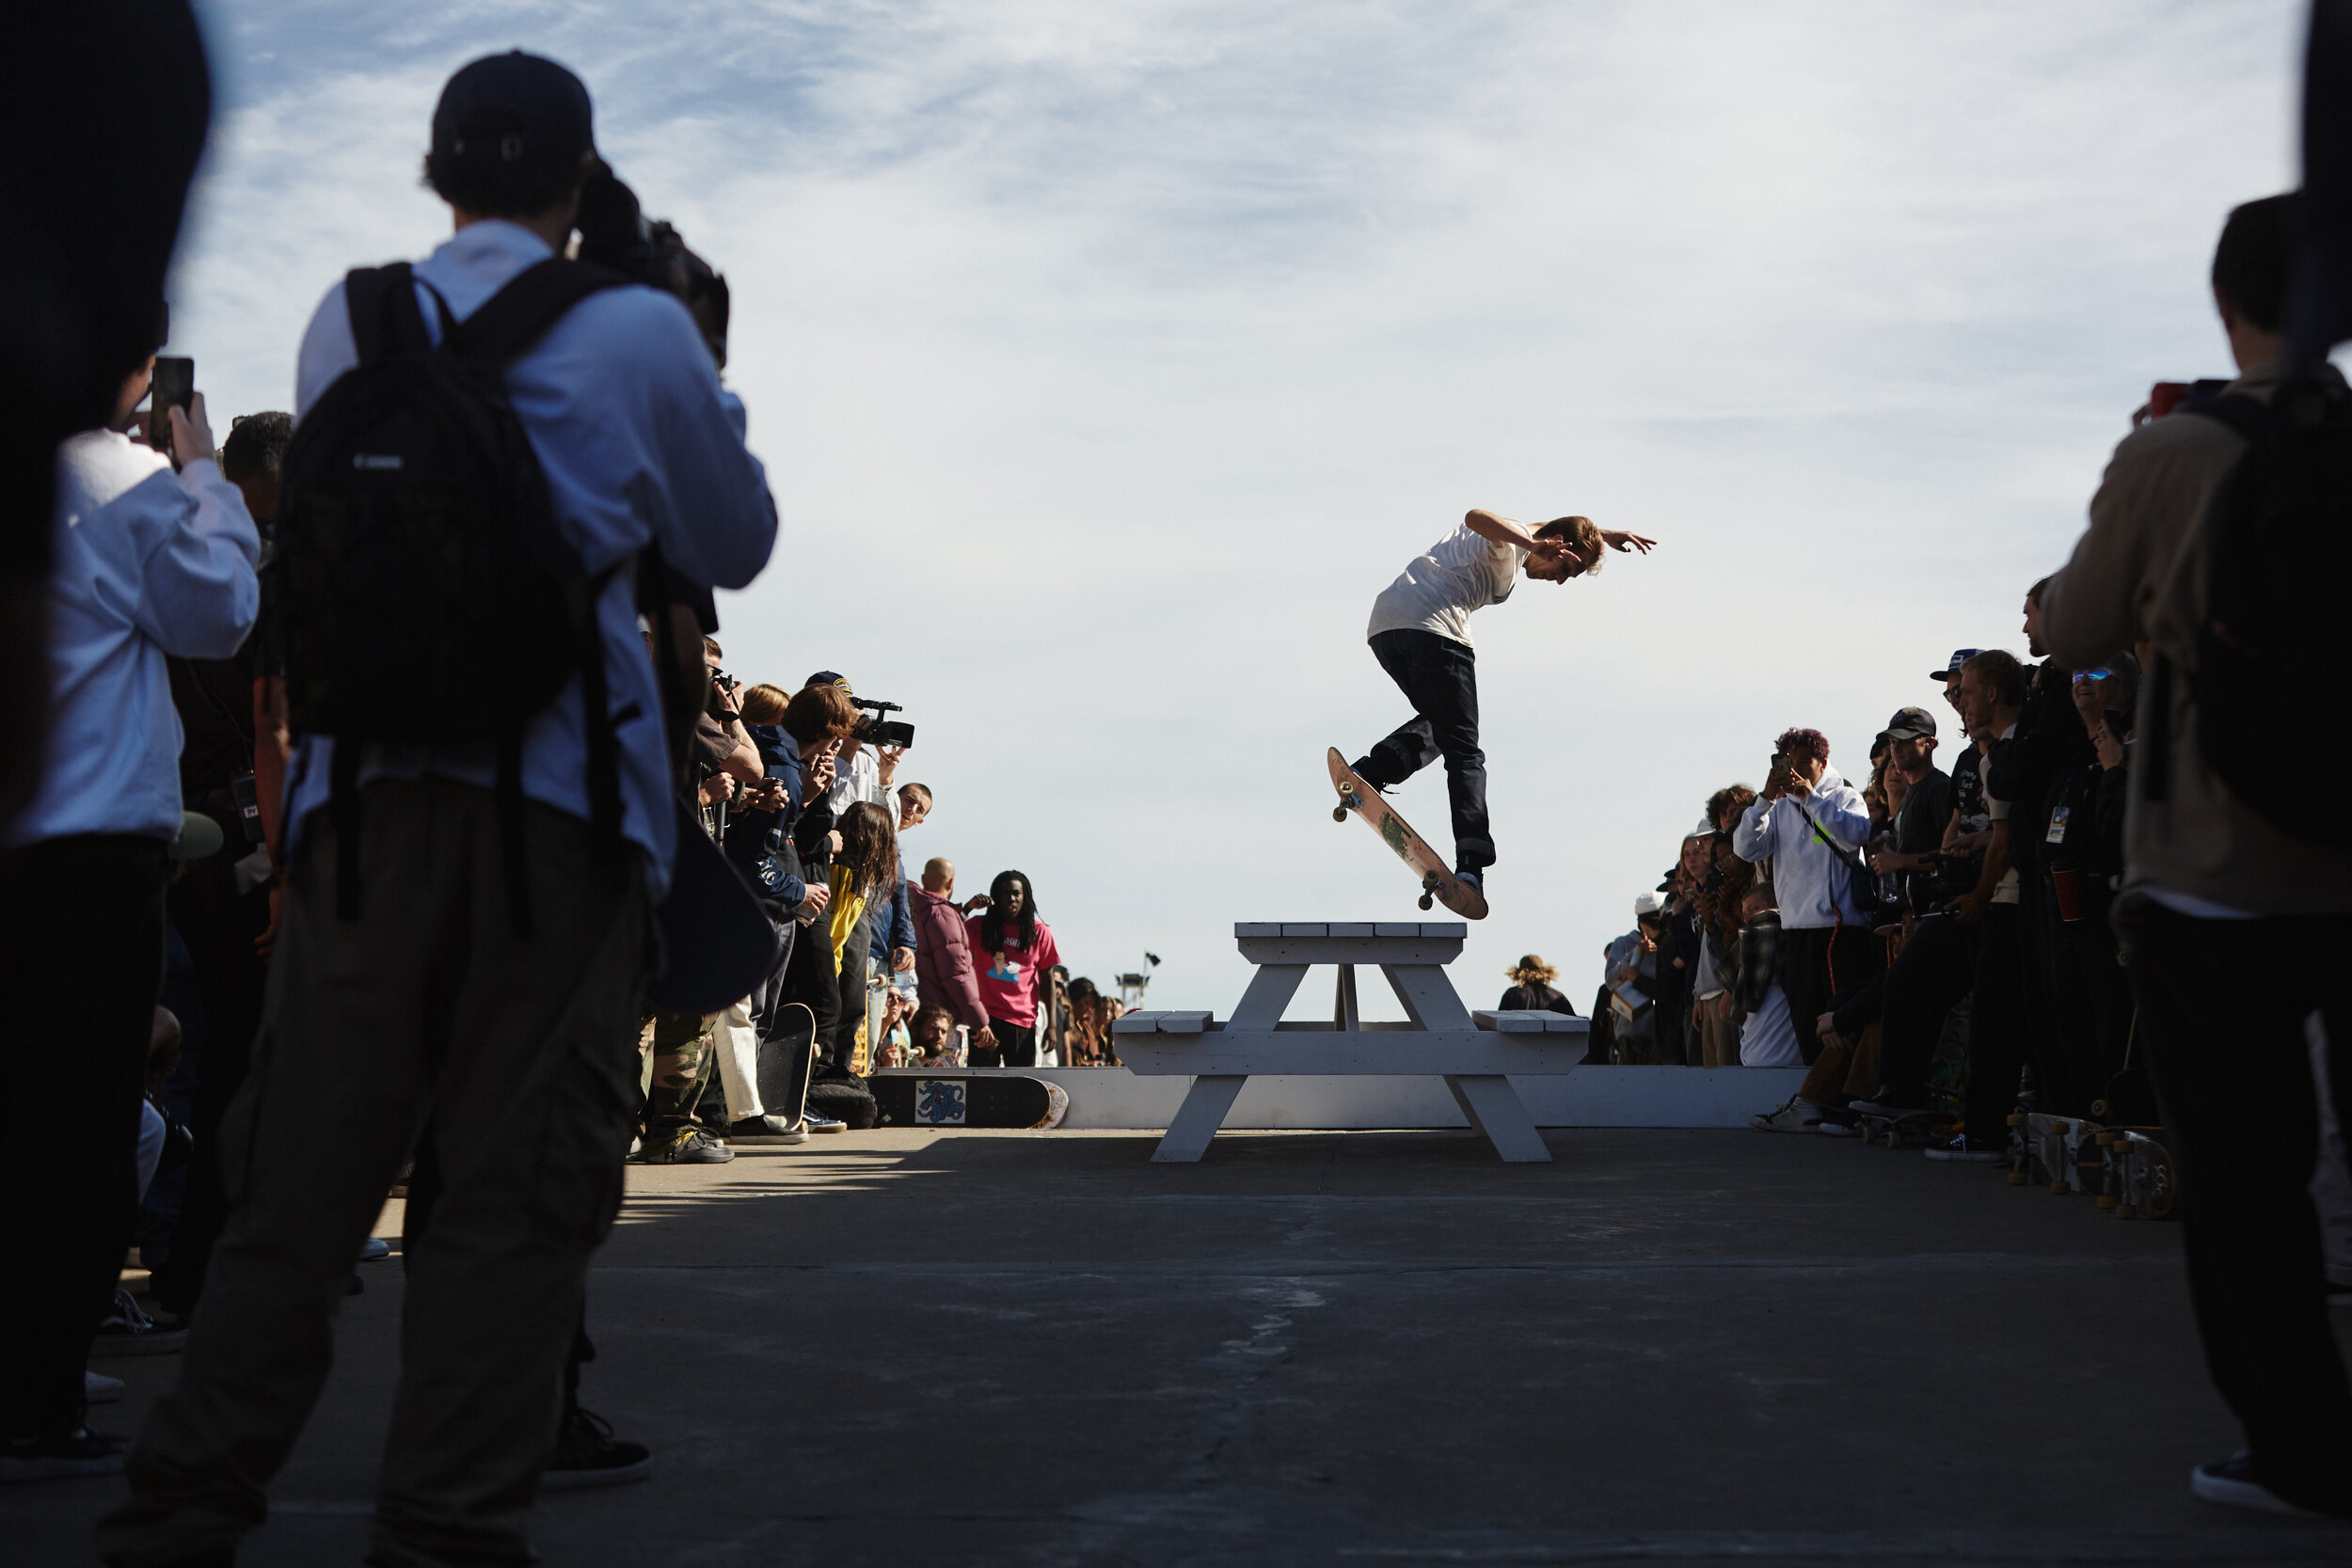 Mark Suciu (kickflip back noseblunts a table) at Dime's "Live at Olympic Stadium" for GQ